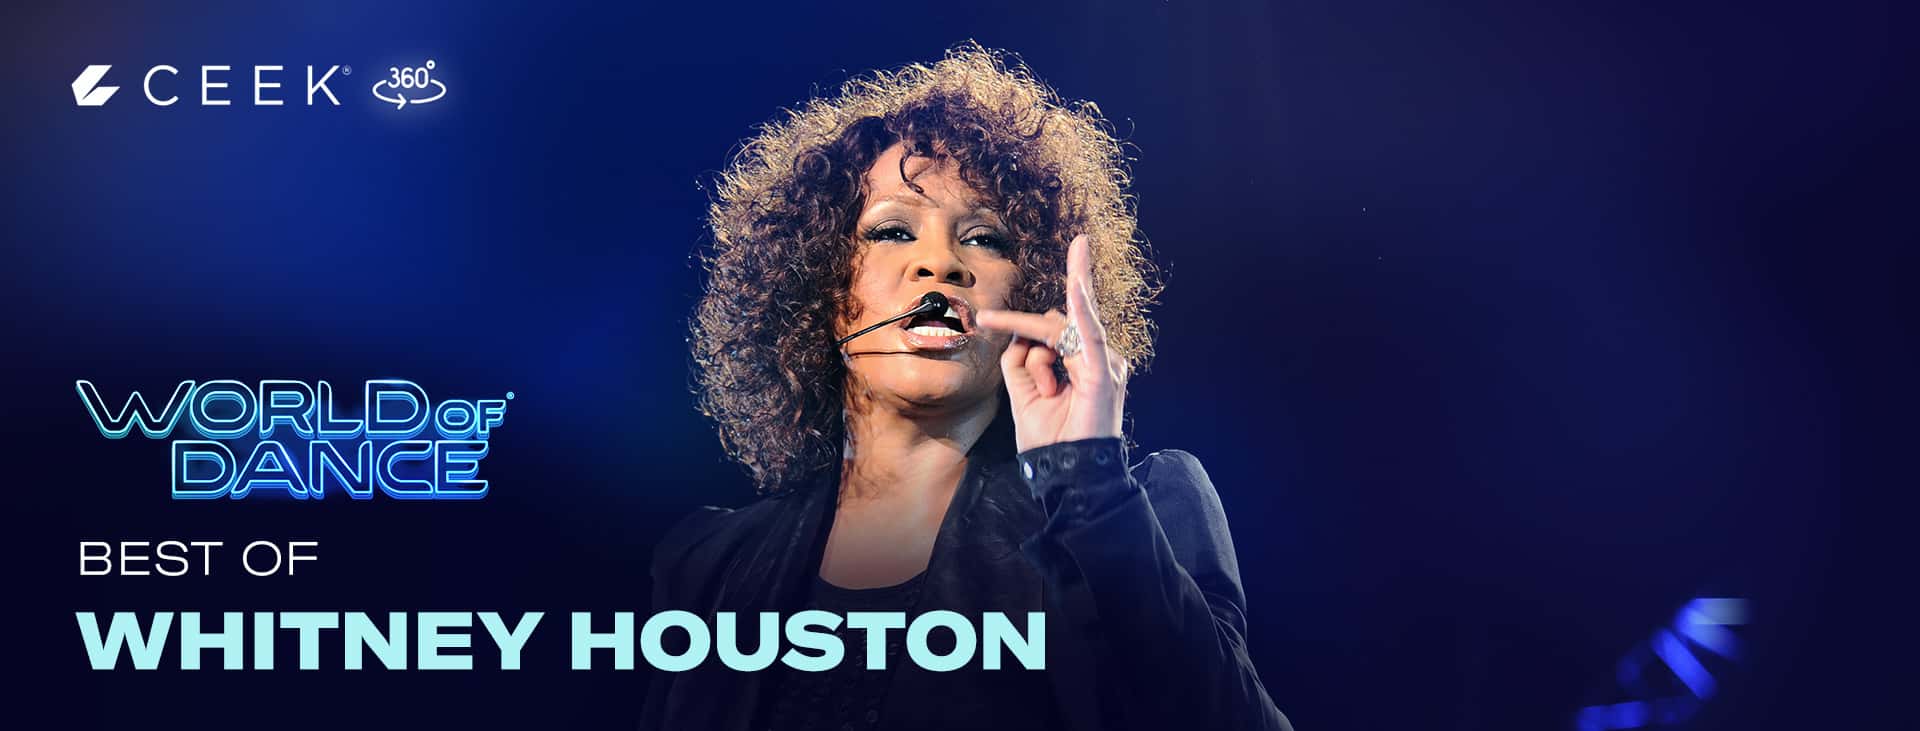 Whitney Houston  songs and videos - CEEK.com